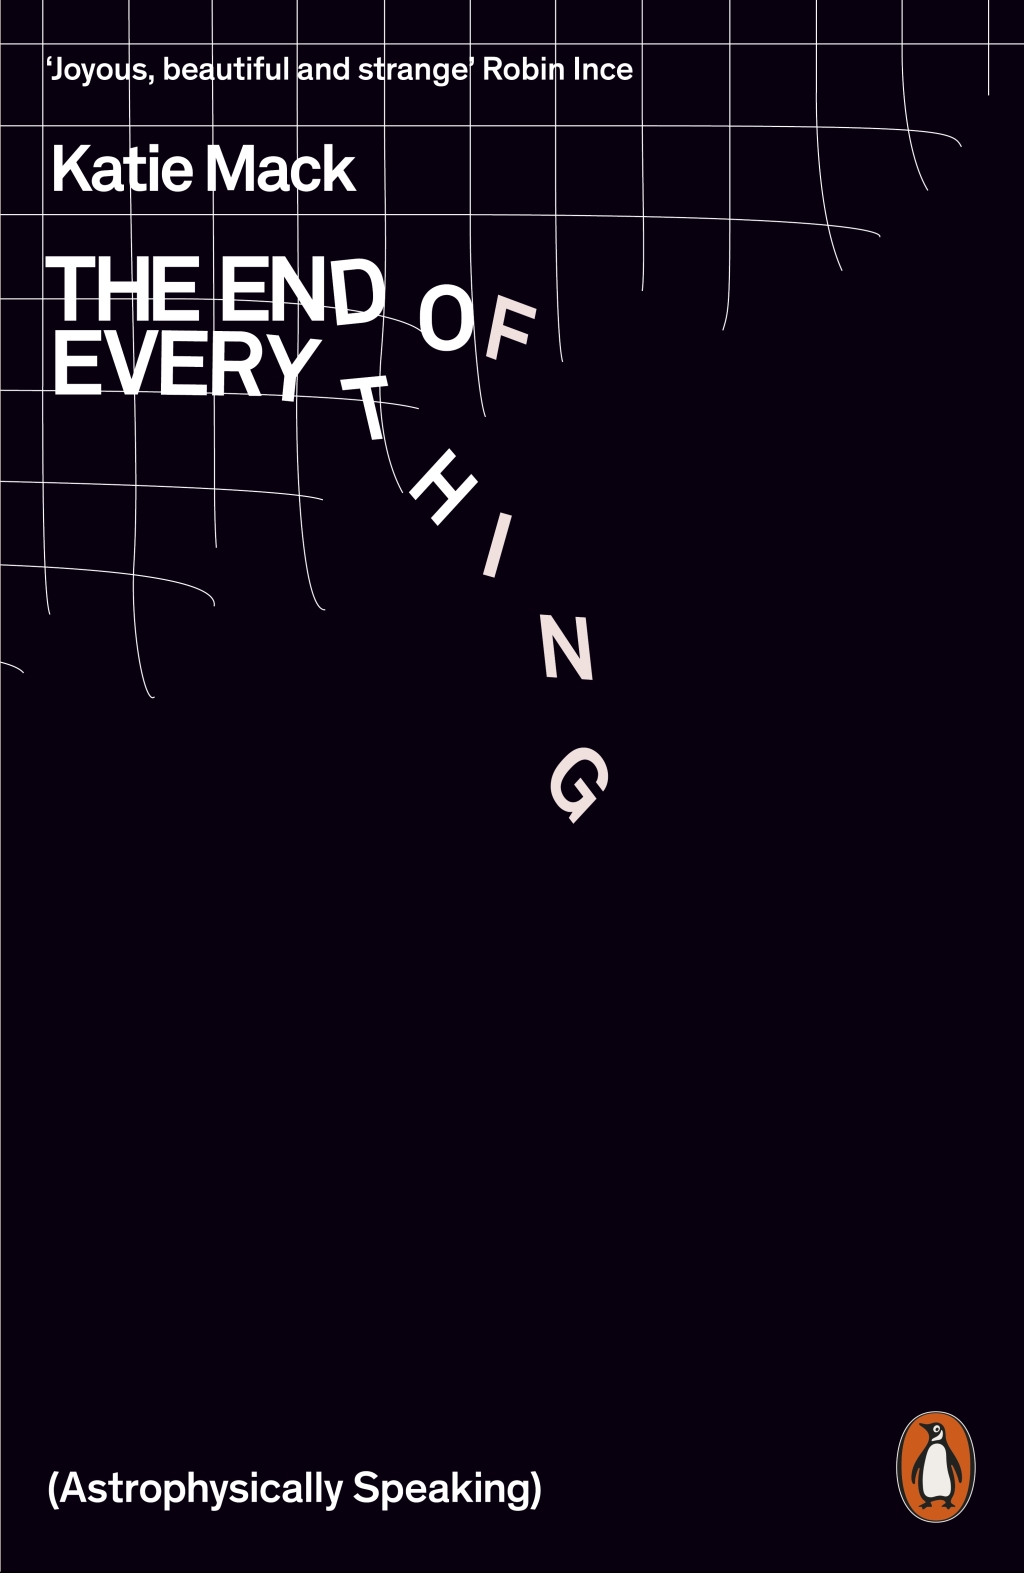 The End of Everything (Astrophysically Speaking) by Katie Mack